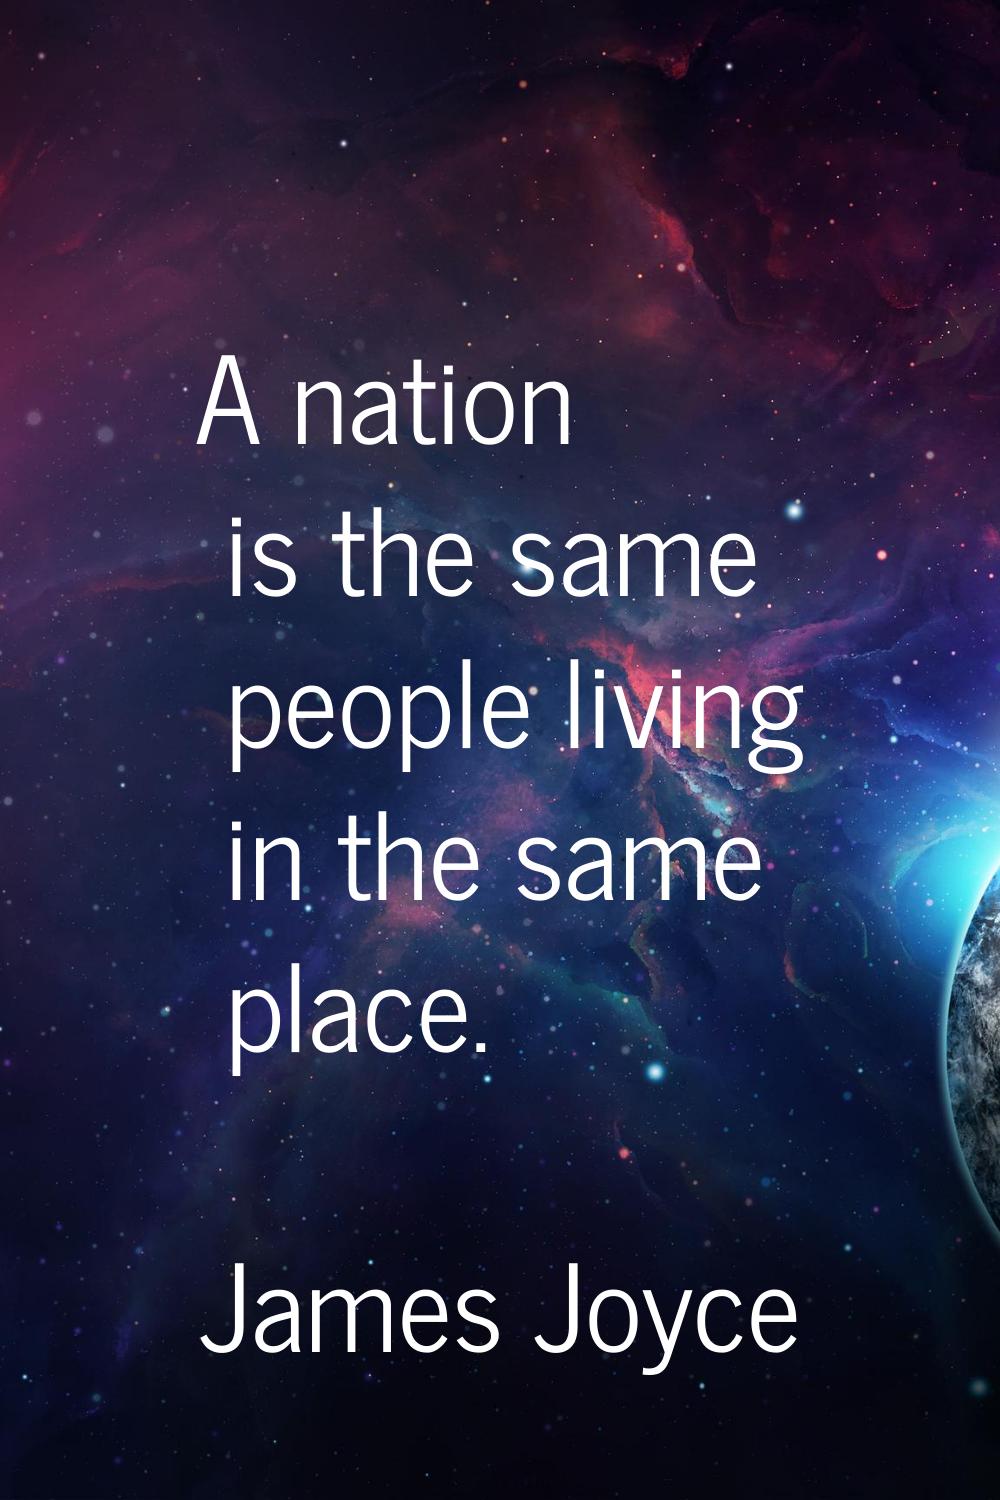 A nation is the same people living in the same place.